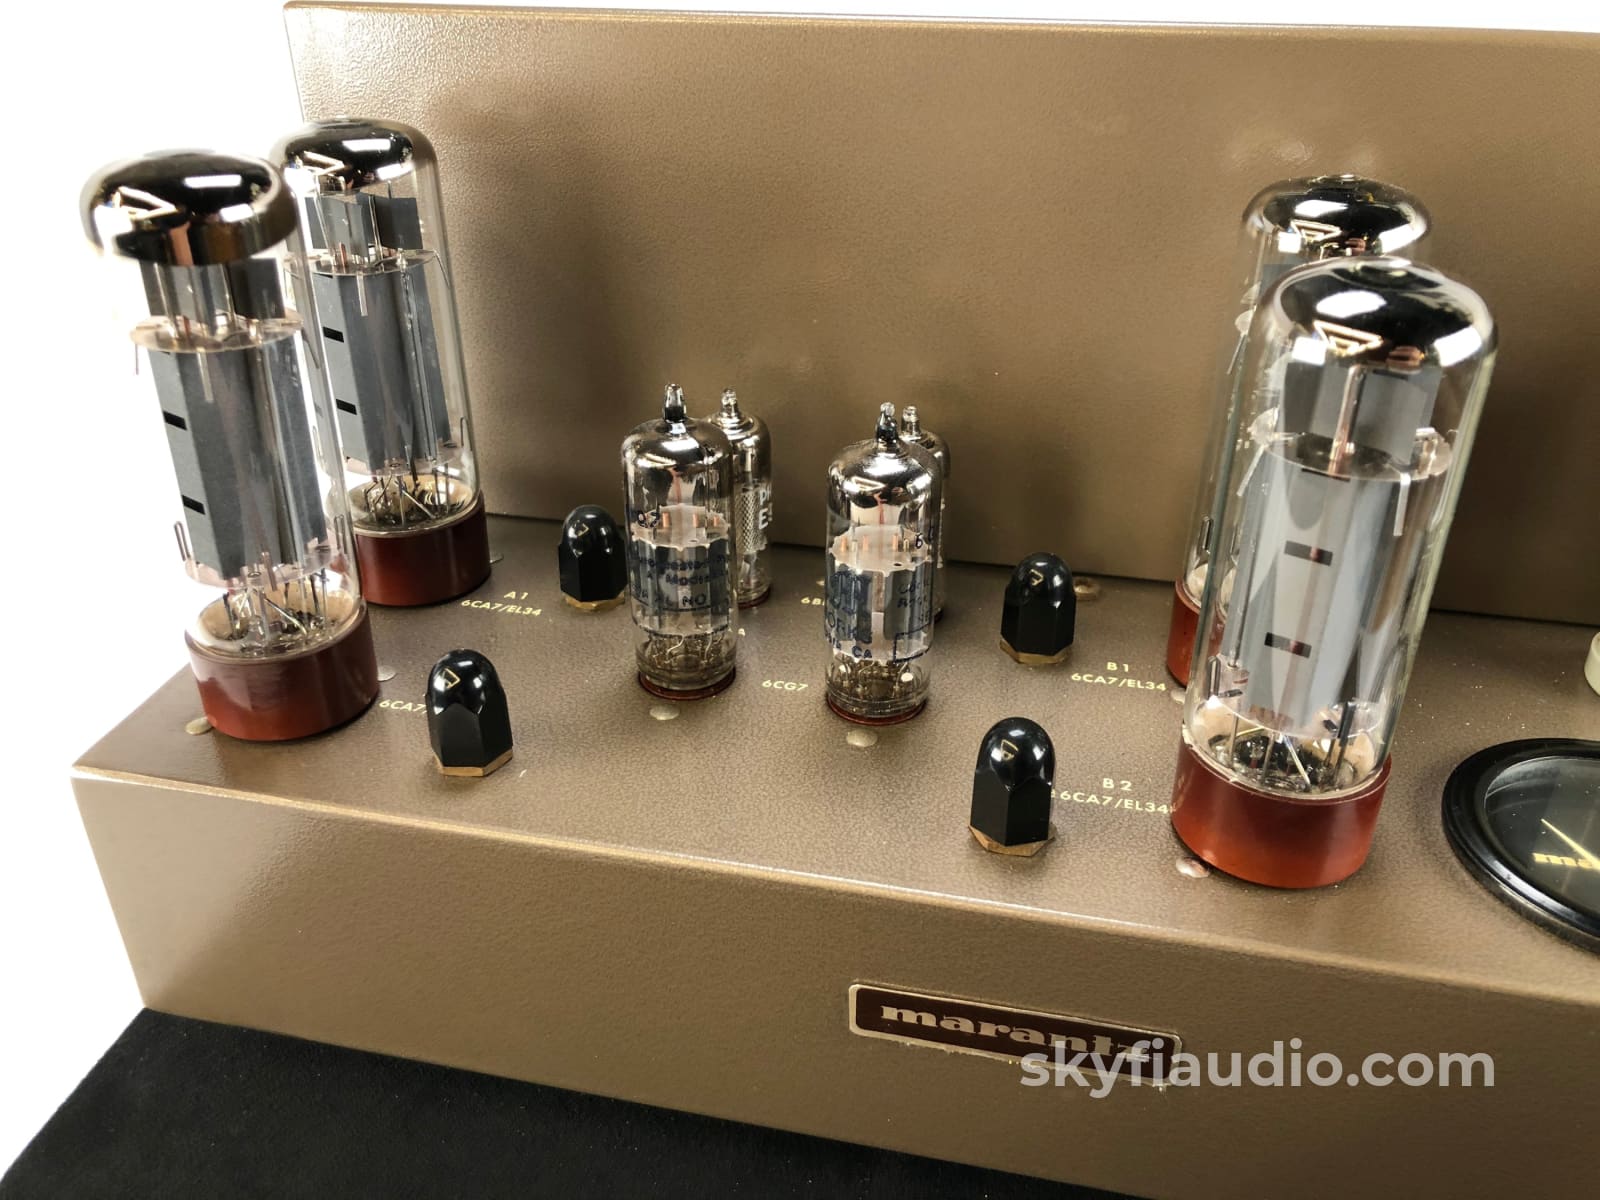 Marantz 8B Tube Amplifier - Completely Restored And Perfect!